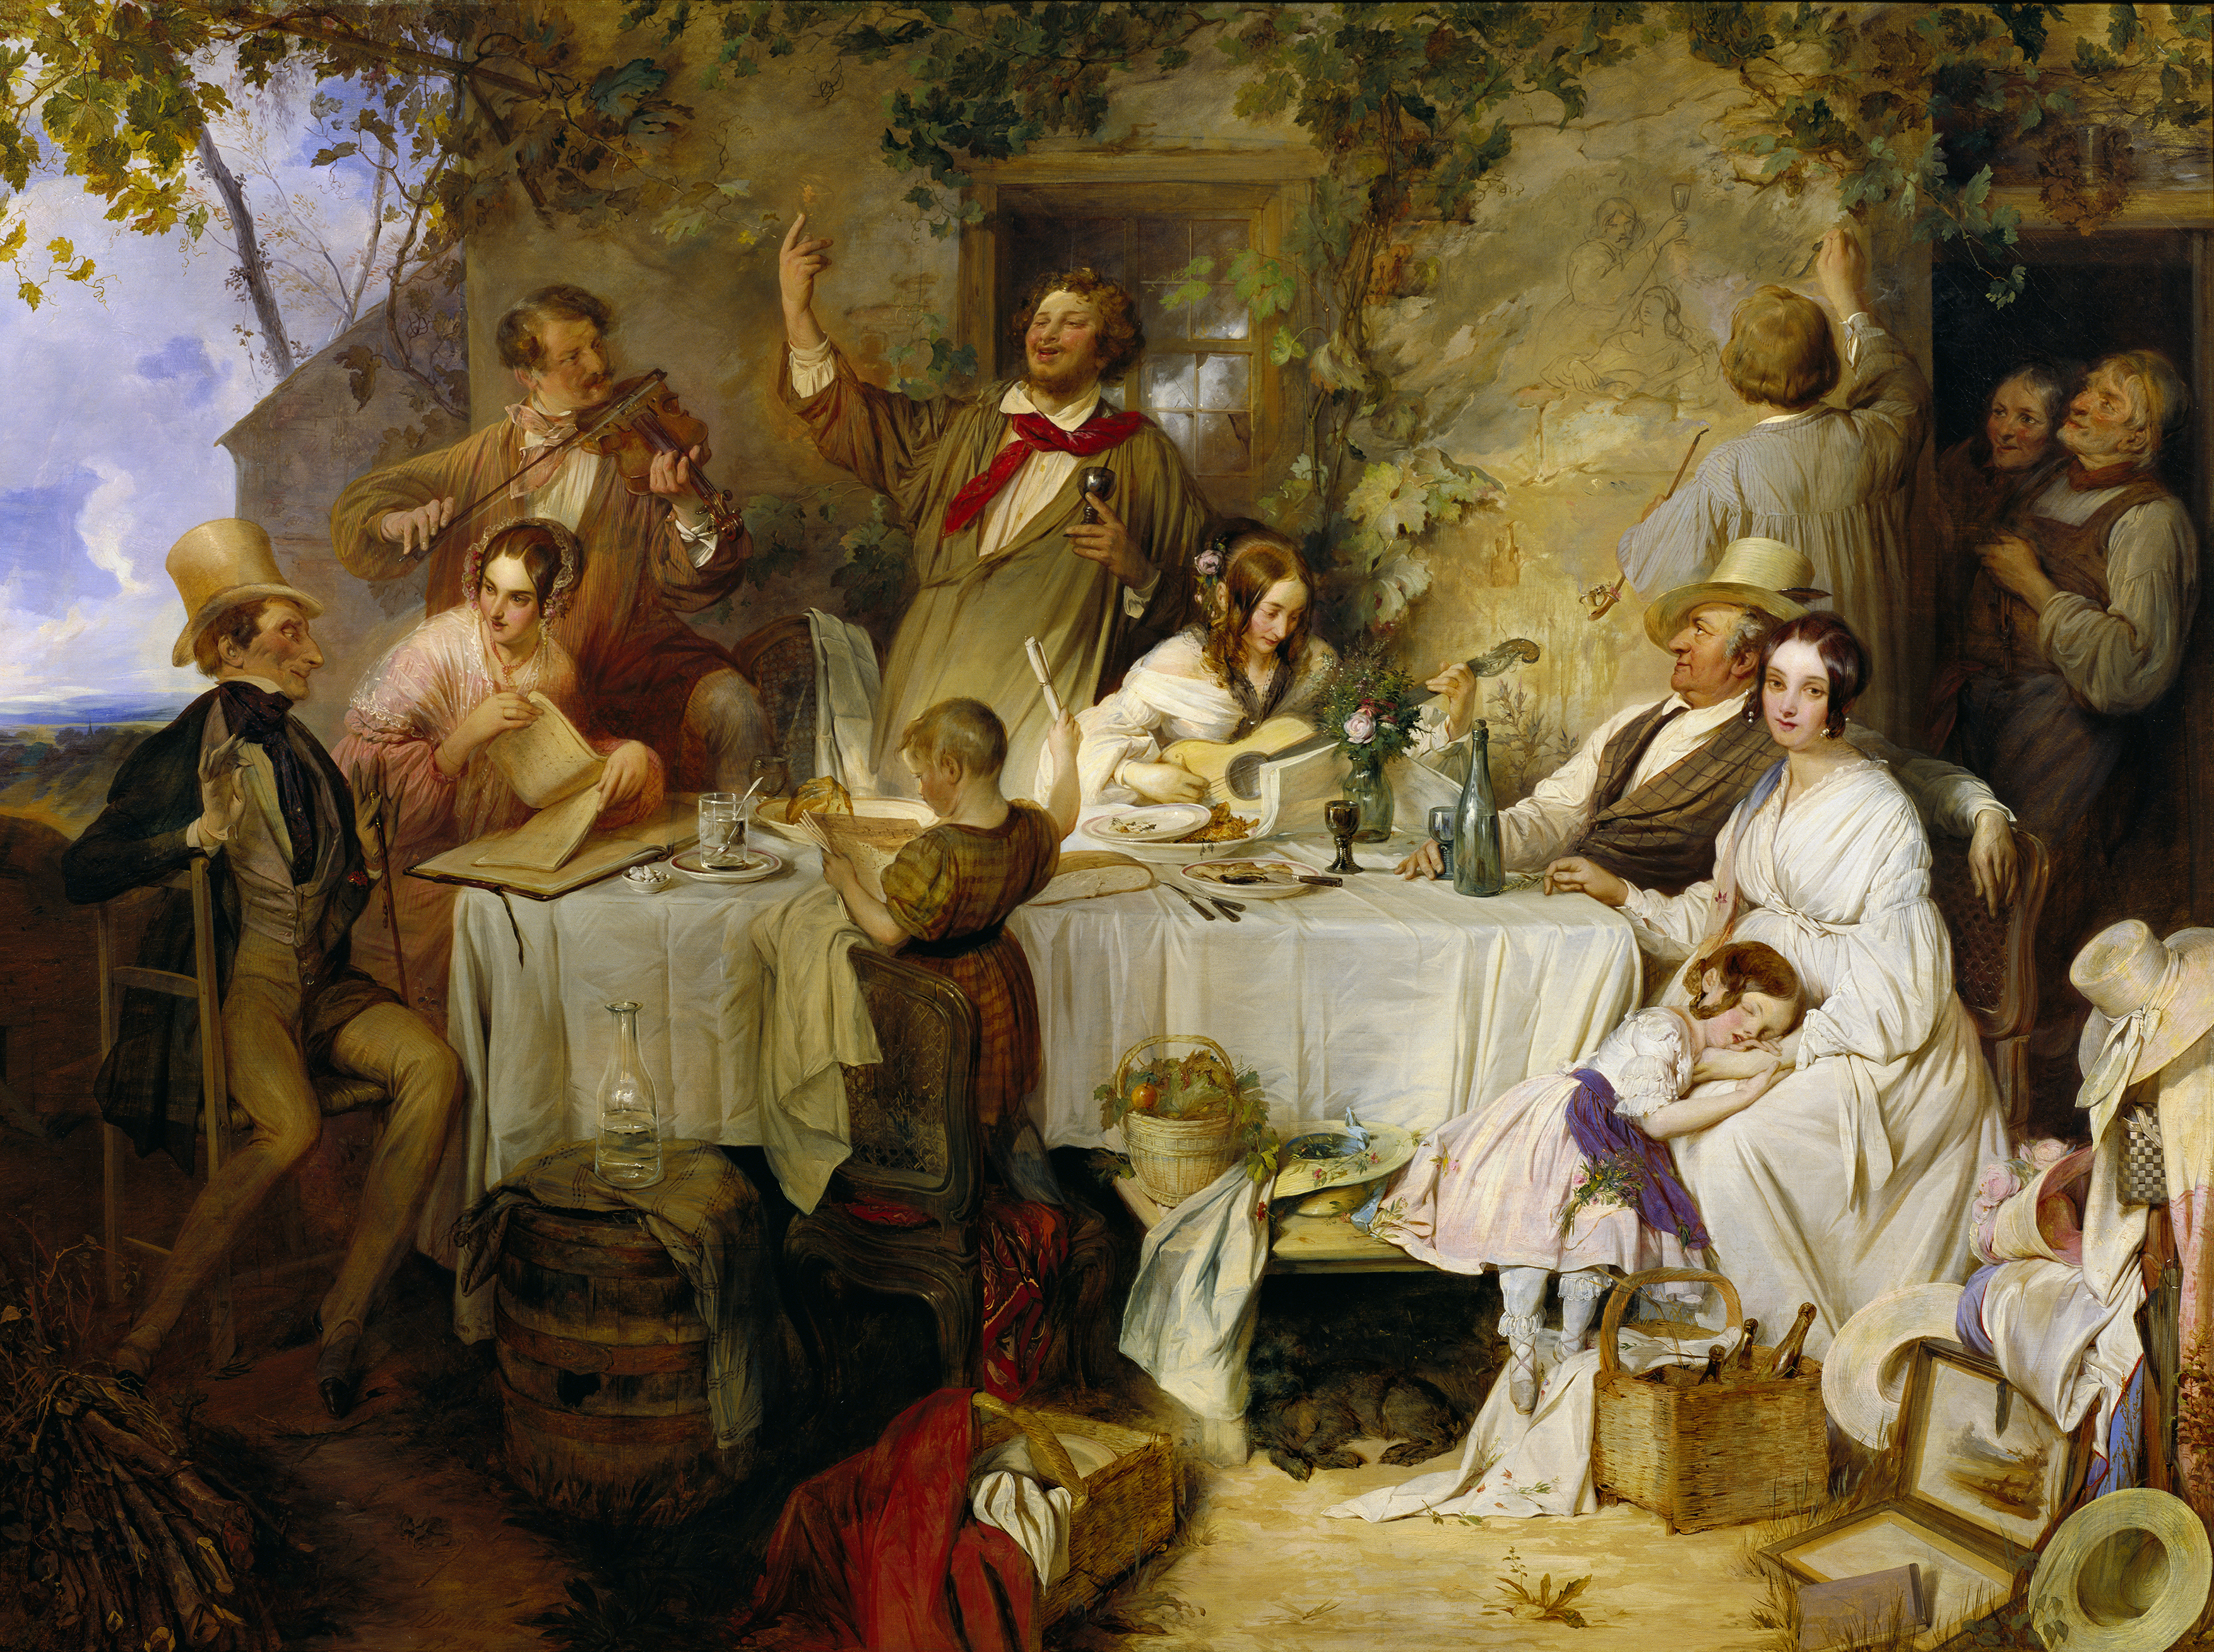 Wein, Weib und Gesang: painting of people sitting around a table in a forest.